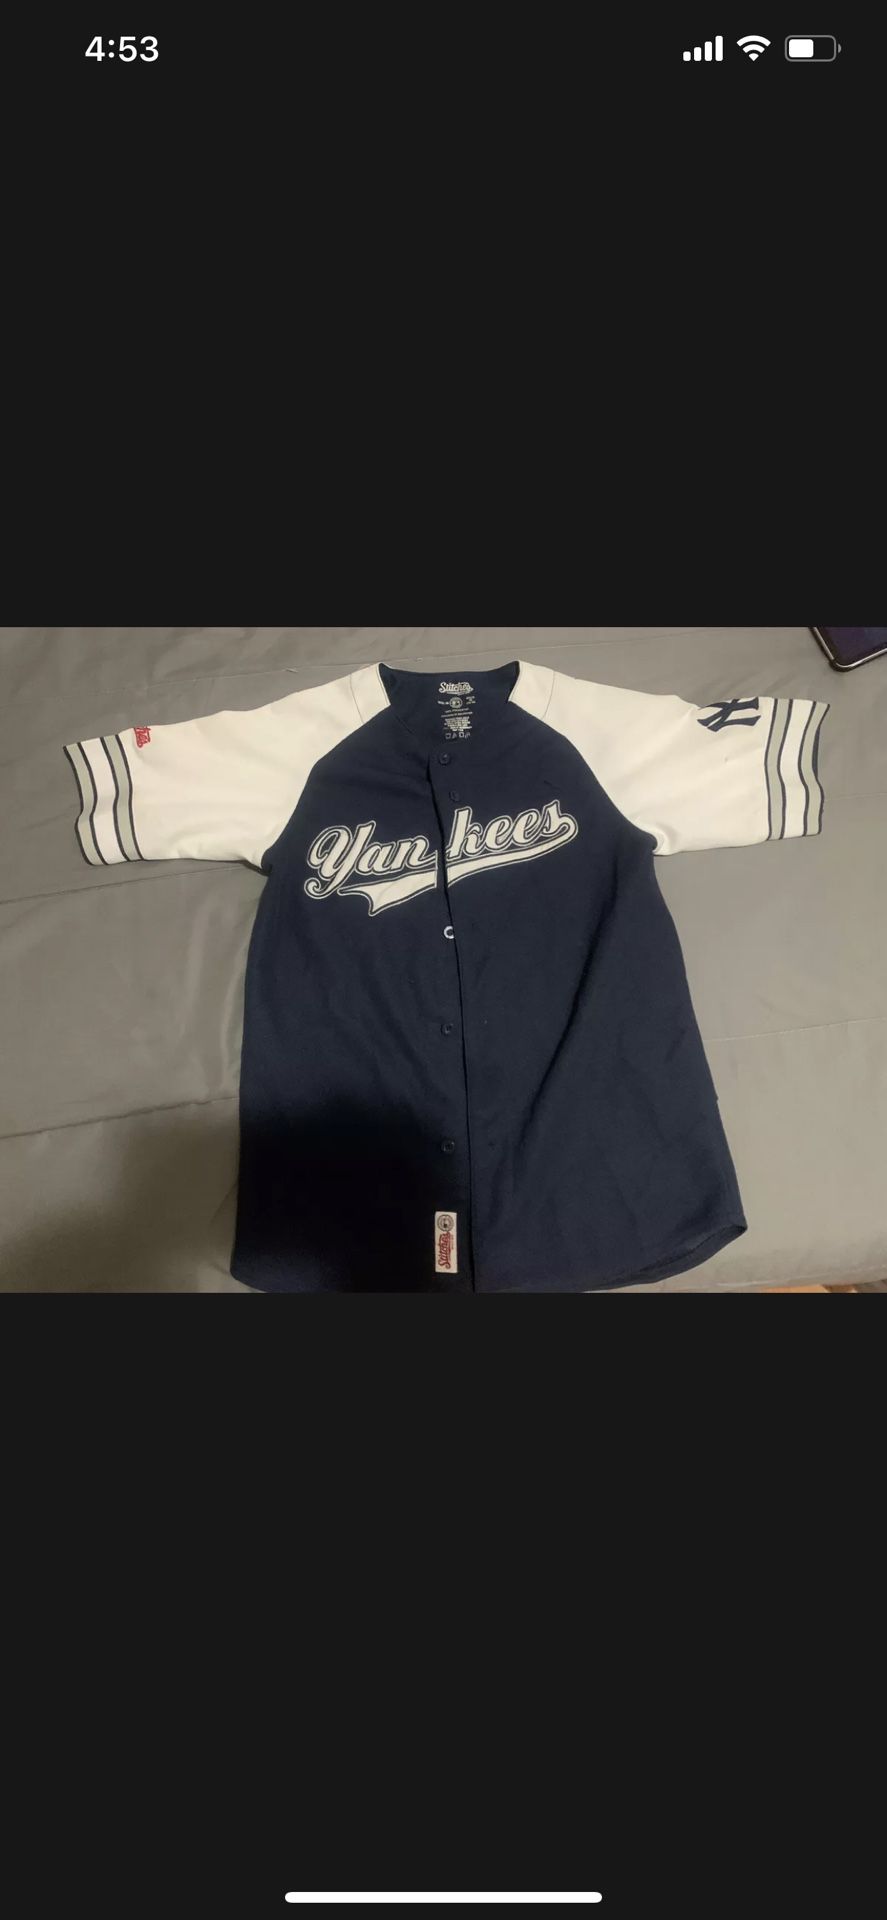 stitches athletic gear yankees